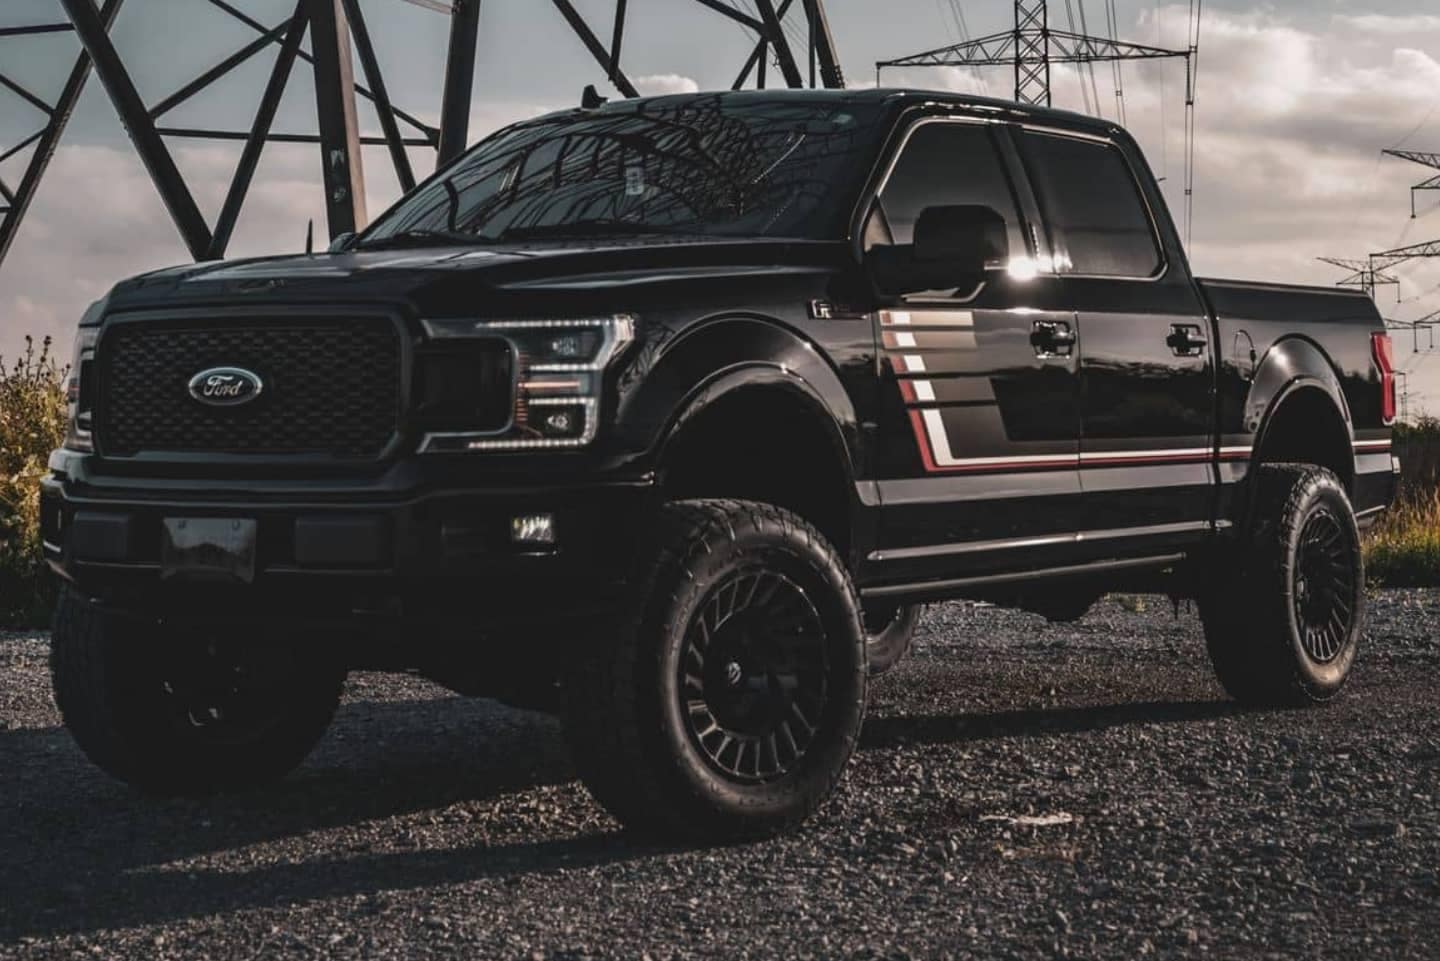 Used Ford F150 Lariat Special Edition in black on the pavement.